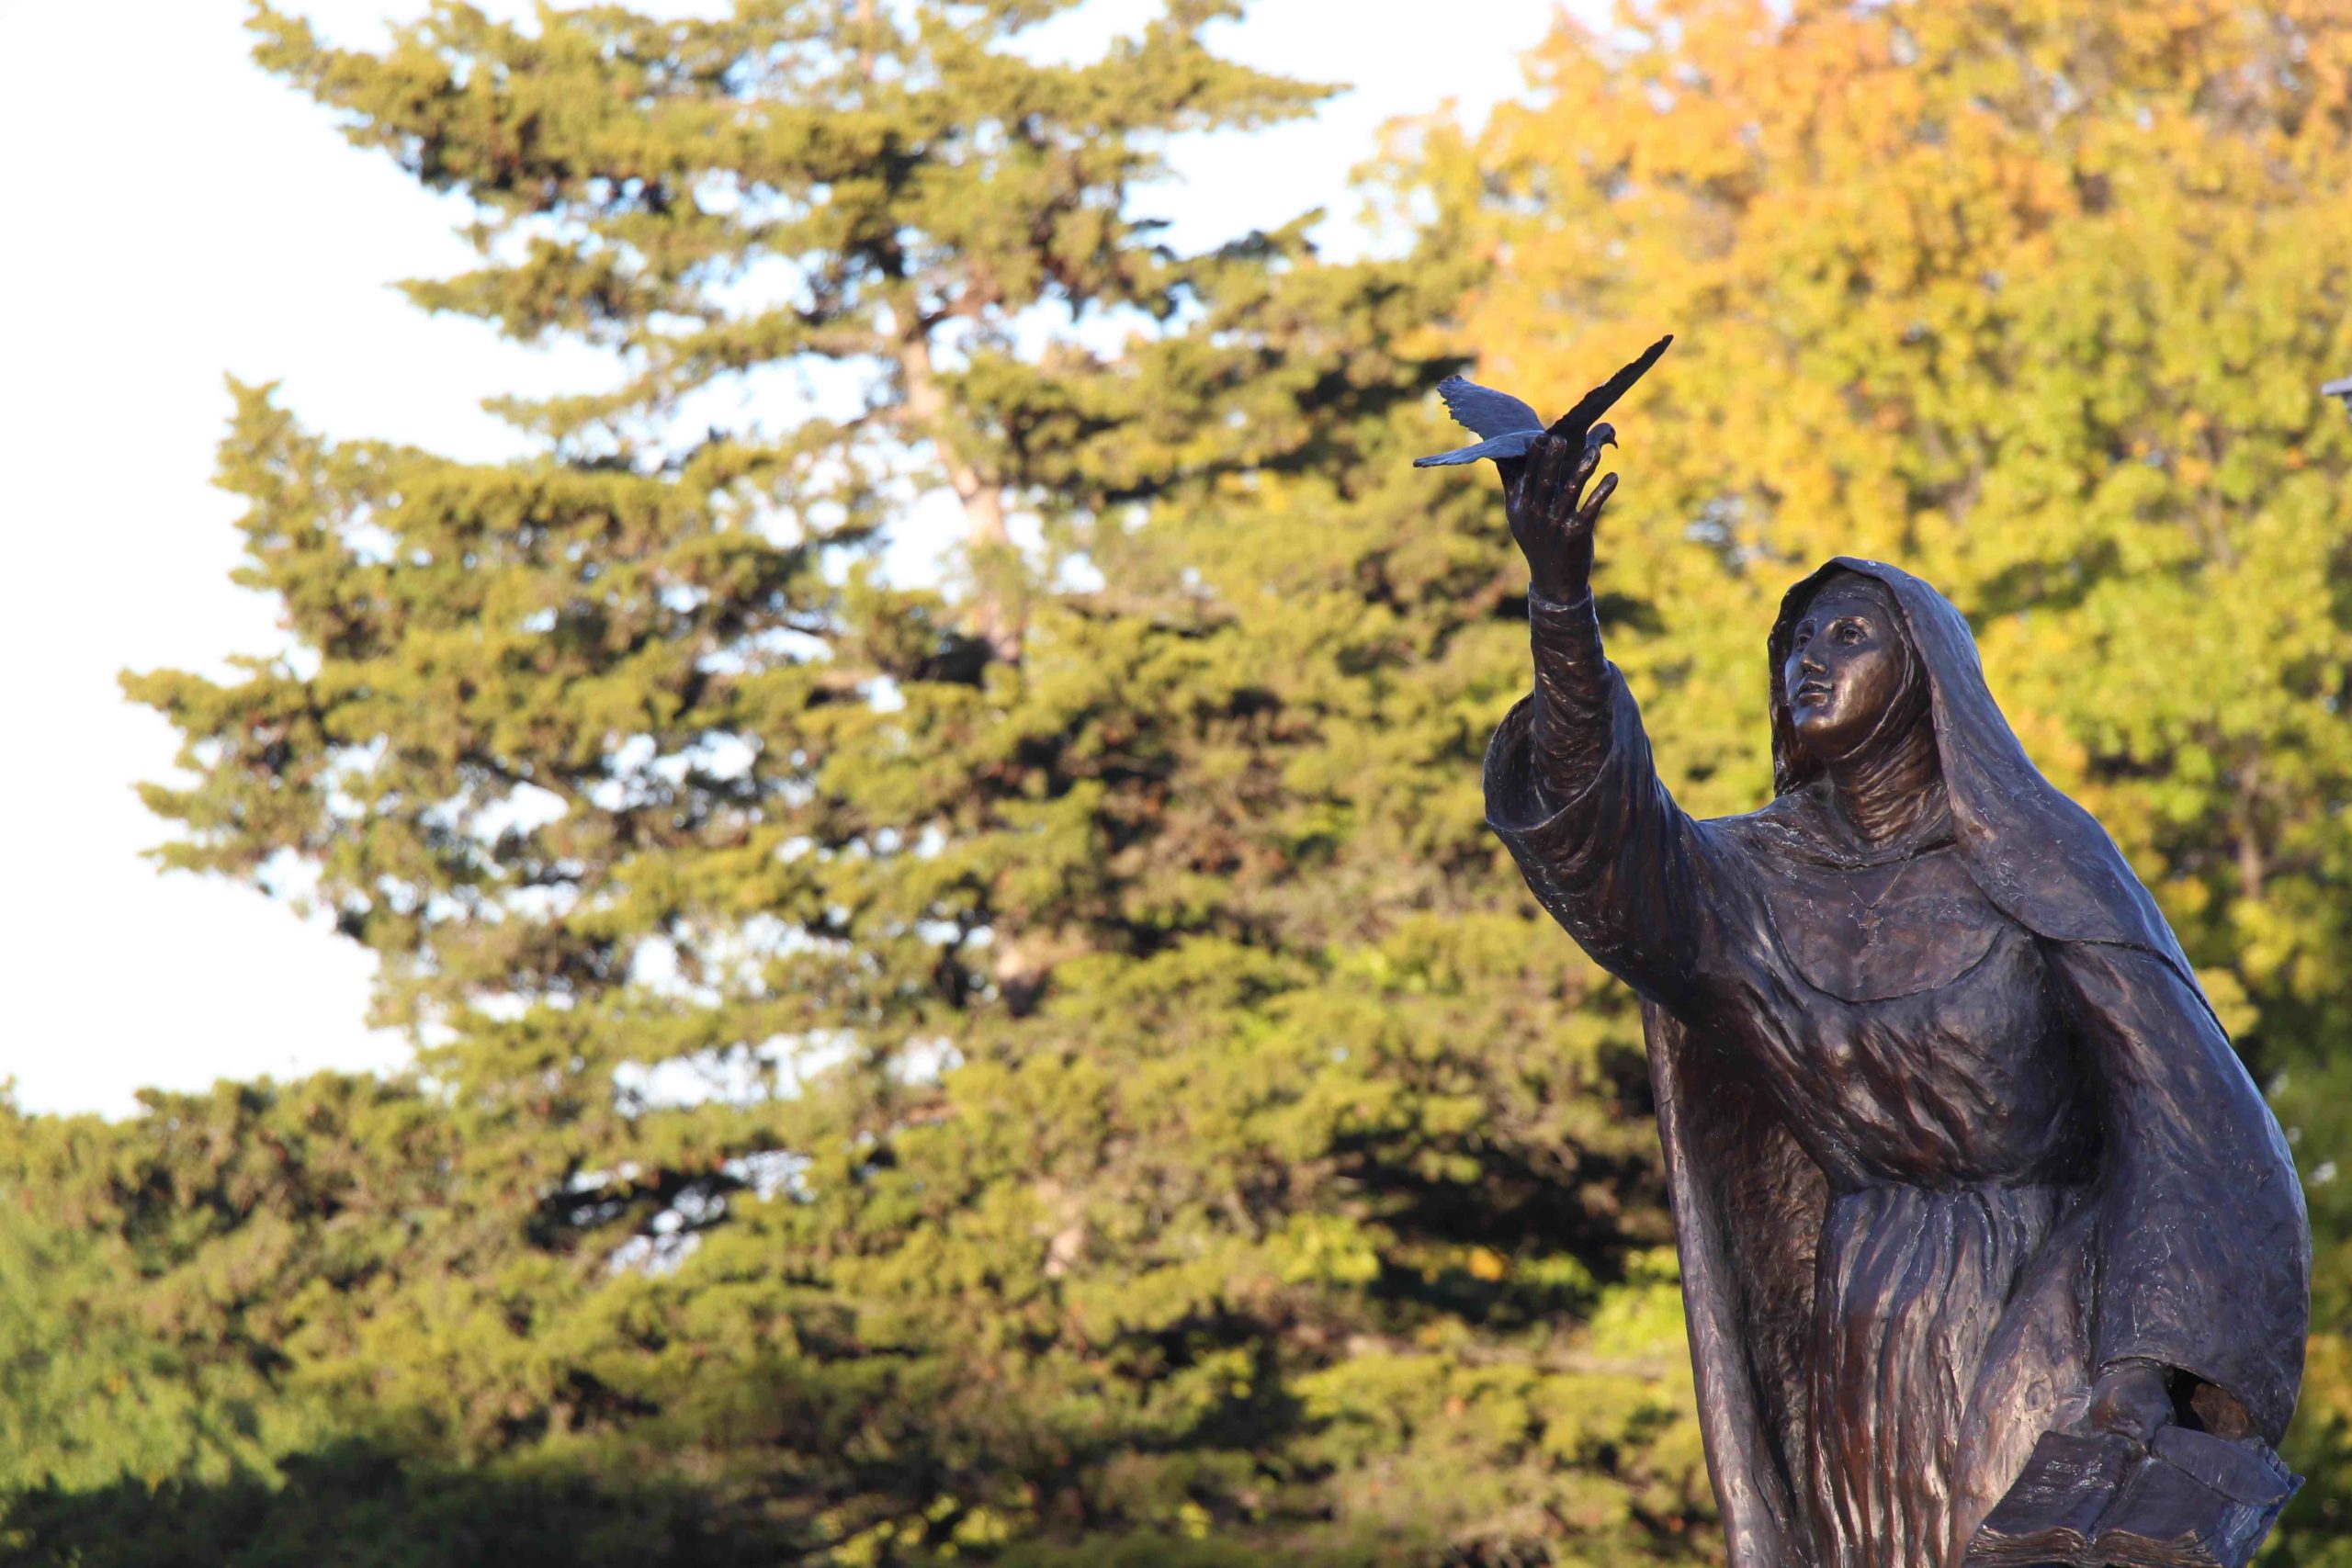 The statue of St. Teresa of Avila with fall foliage in the background.